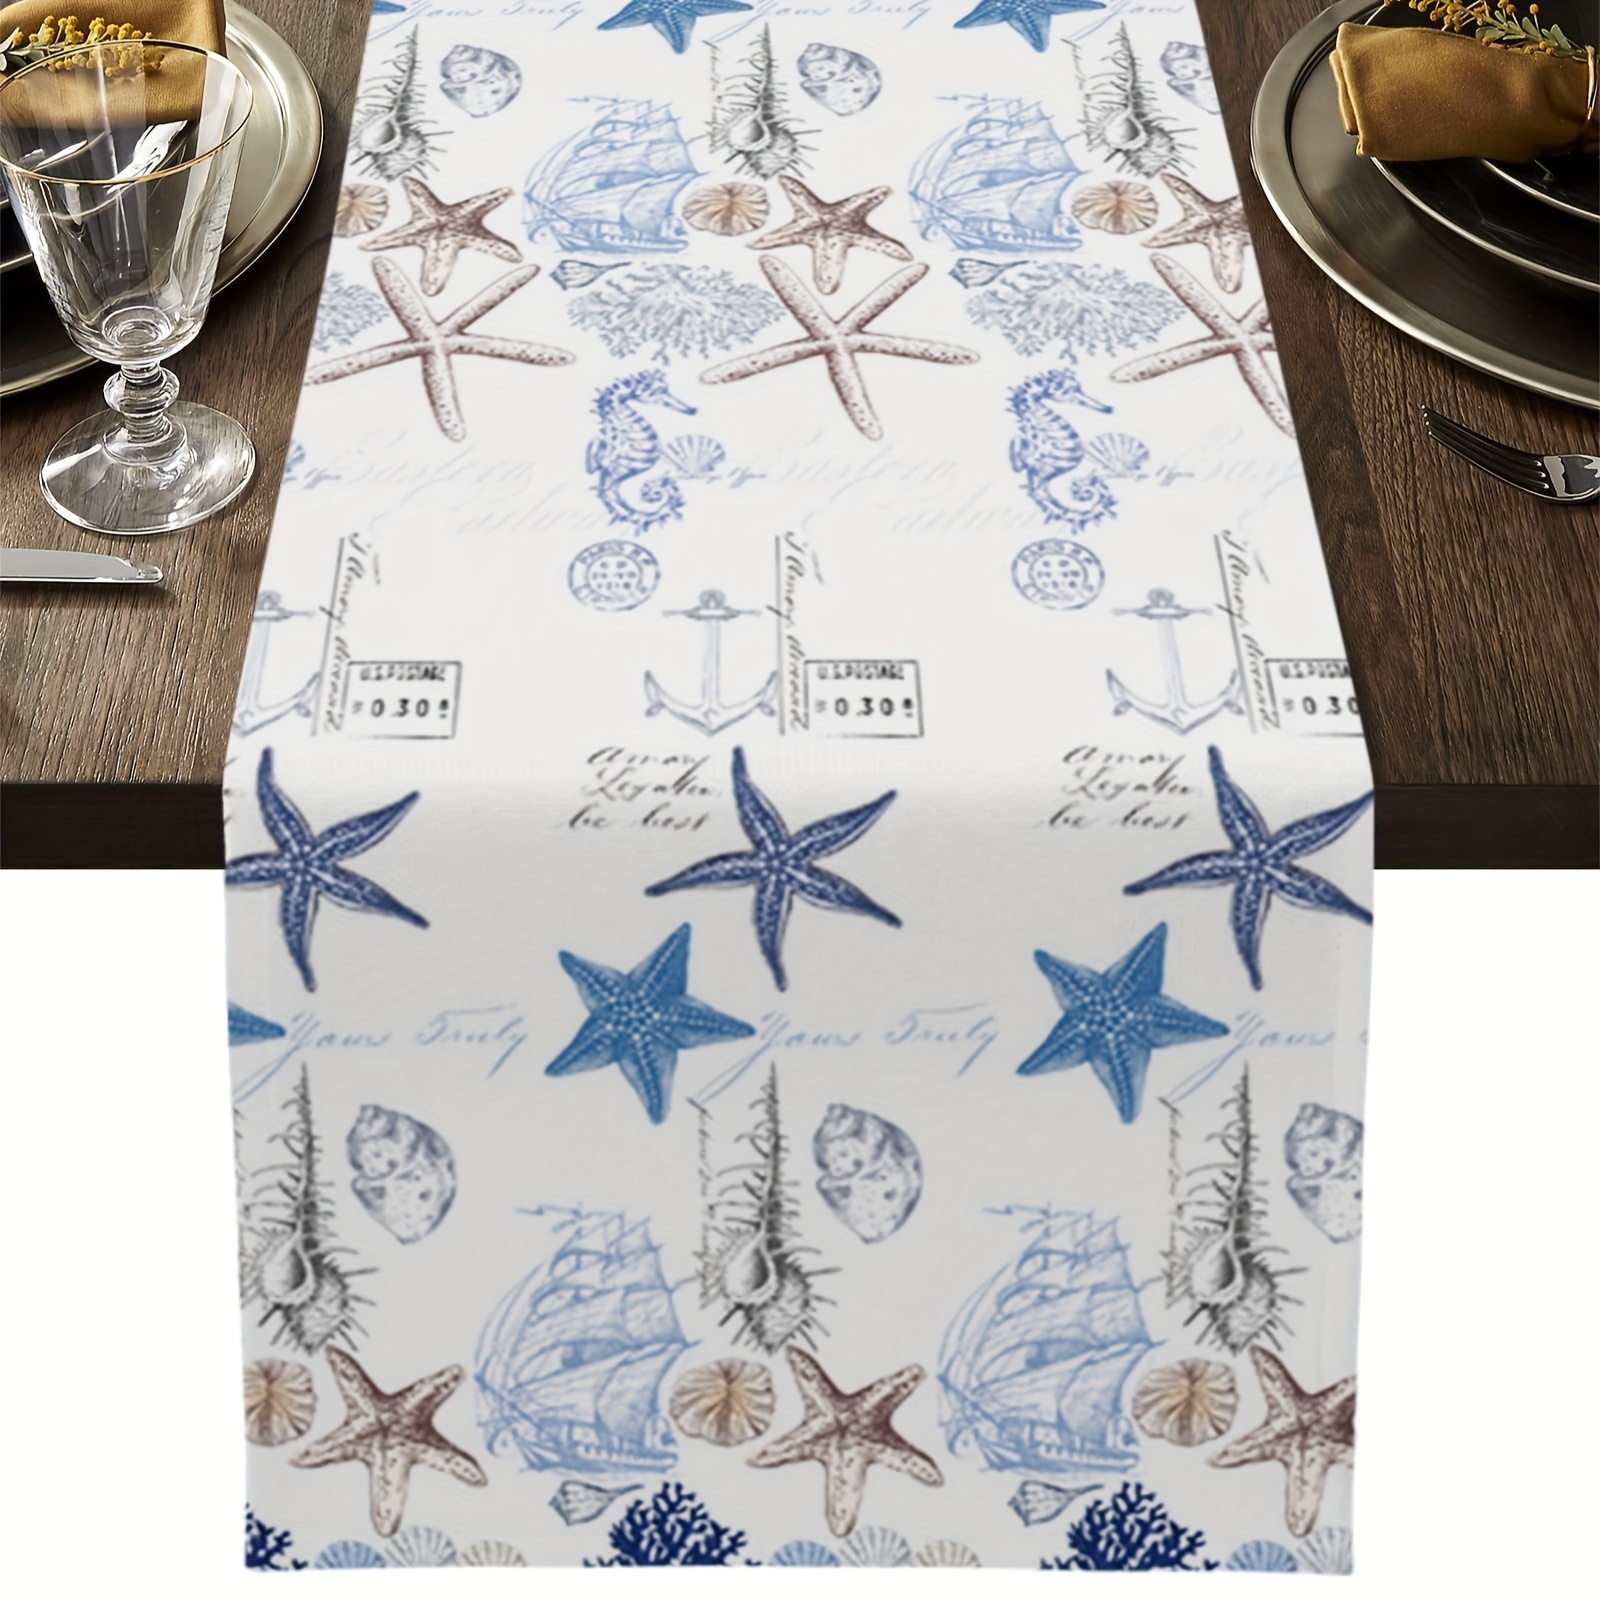 

1pc, Table Runner, Beach Coastal Nautical Table Runner, Dresser Scarves, Undersea Hippocampus Boat Blue Starfish Seahorse Anchor Shell Coral Table Decor, For Home Decor, Party Decor